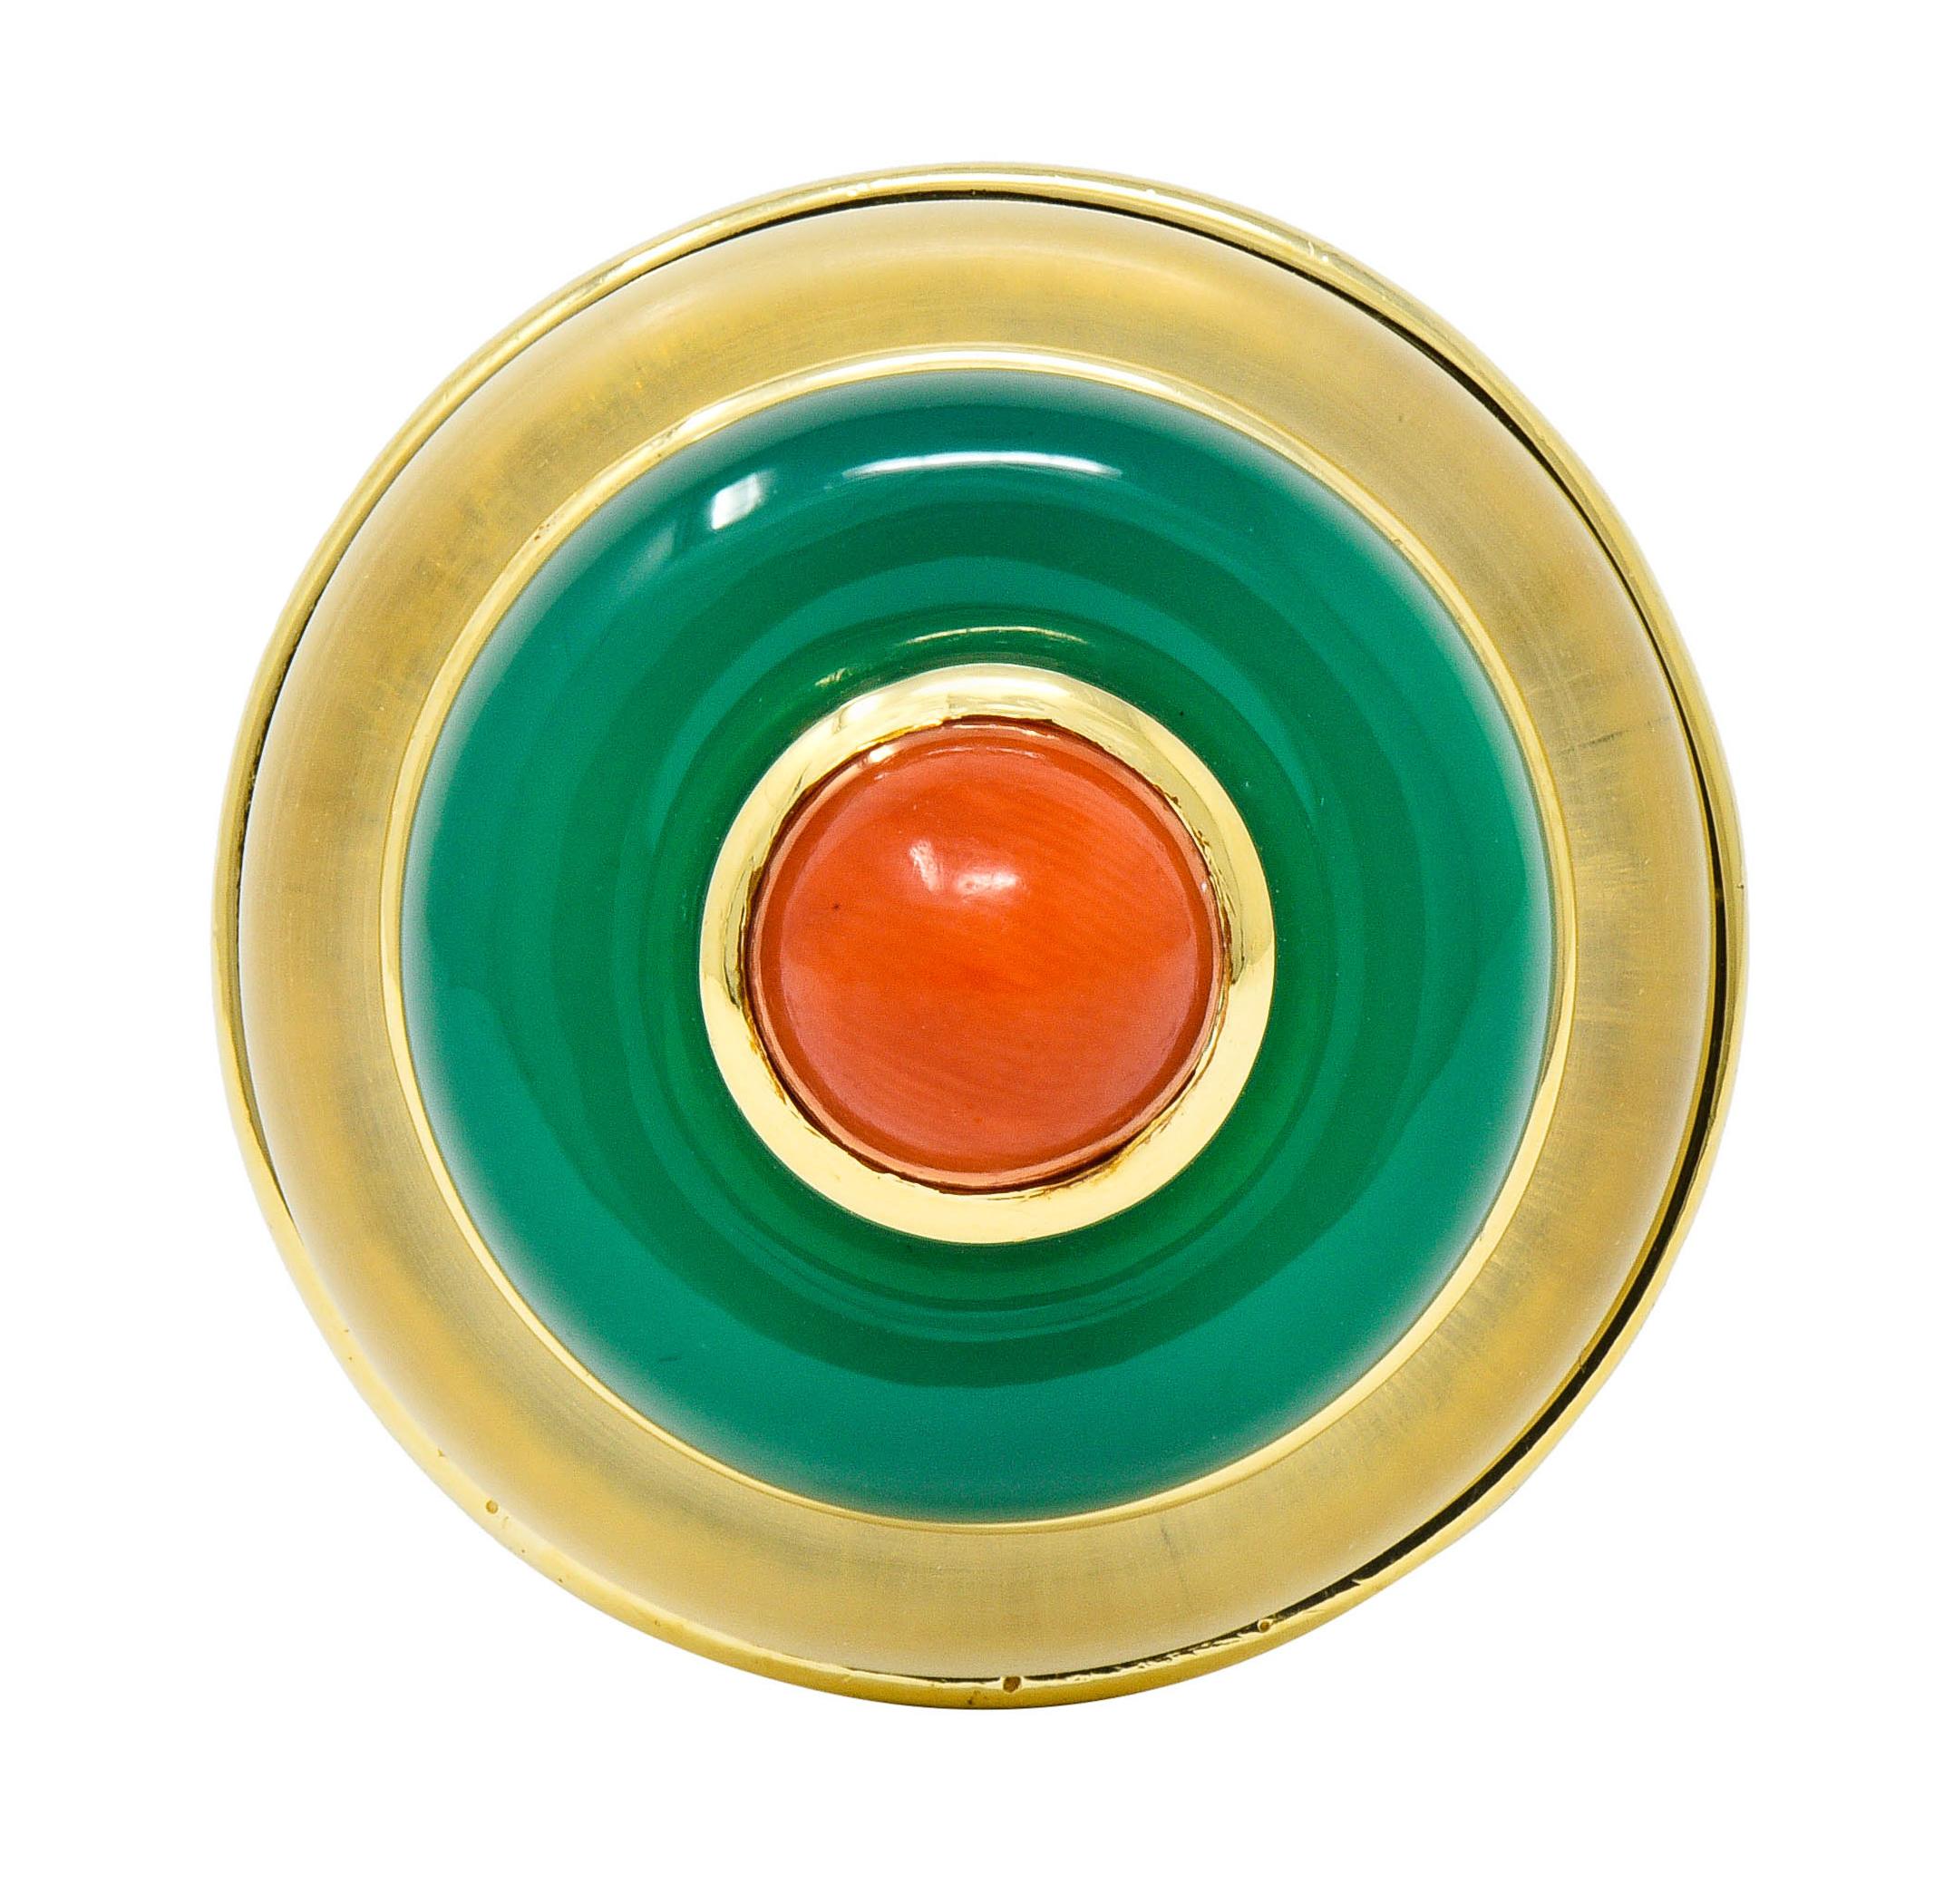  Statement ring is designed with three tiers of concentric circles comprised of coral, chrysoprase, and rock crystal

Centering a 7.6 mm round coral cabochon with bright reddish-orange color

Surrounded by a carved ring of chrysoprase, translucent